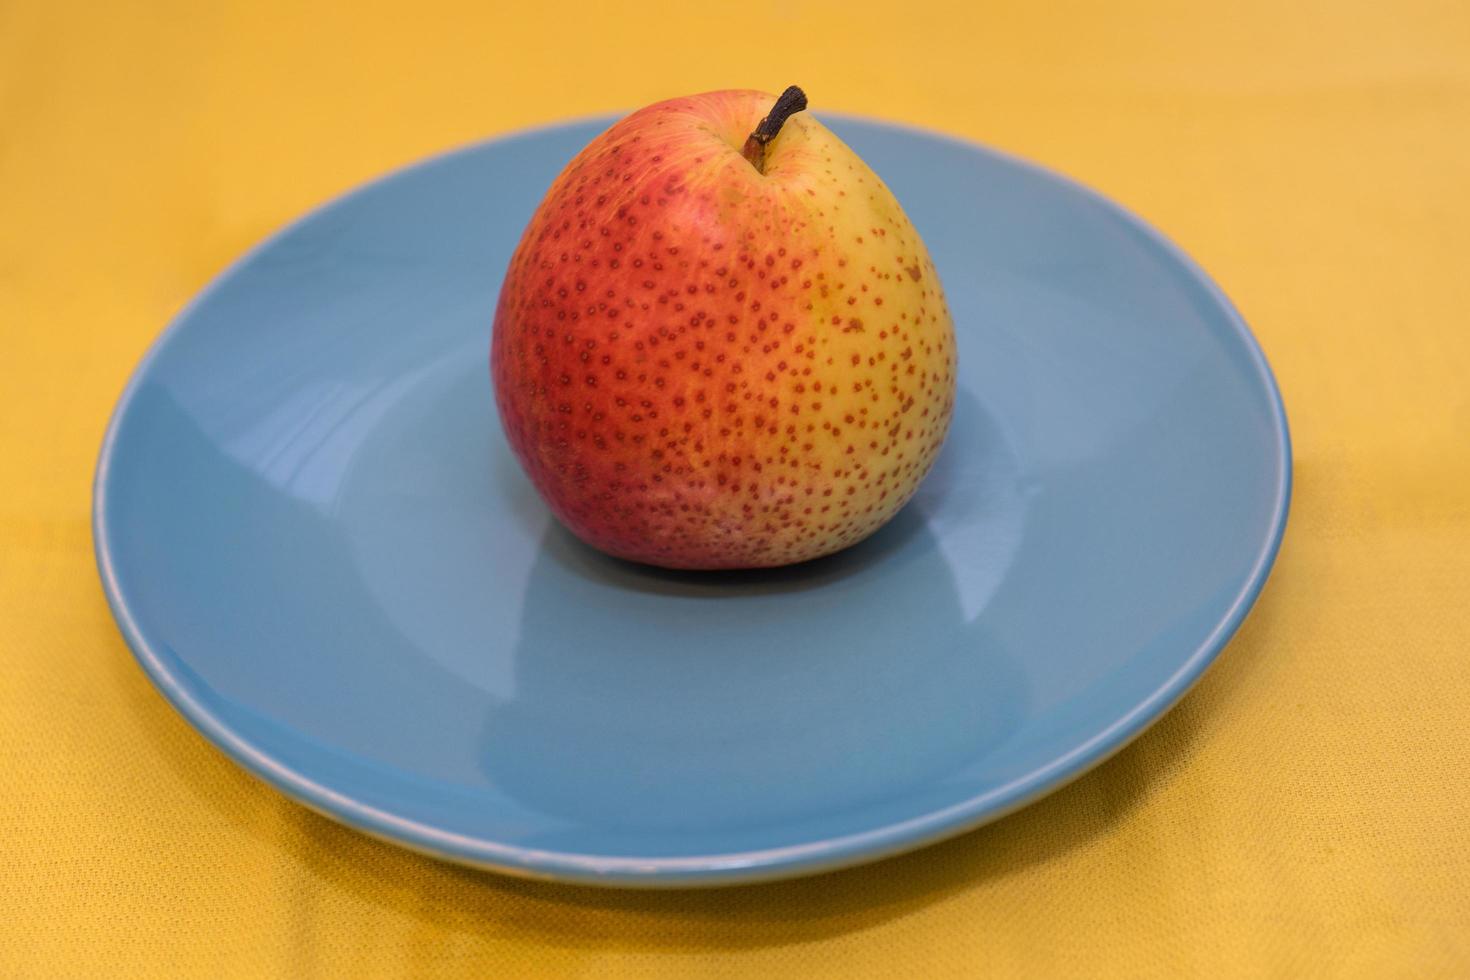 Juicy and bright pear on blue ceramic plate standing photo